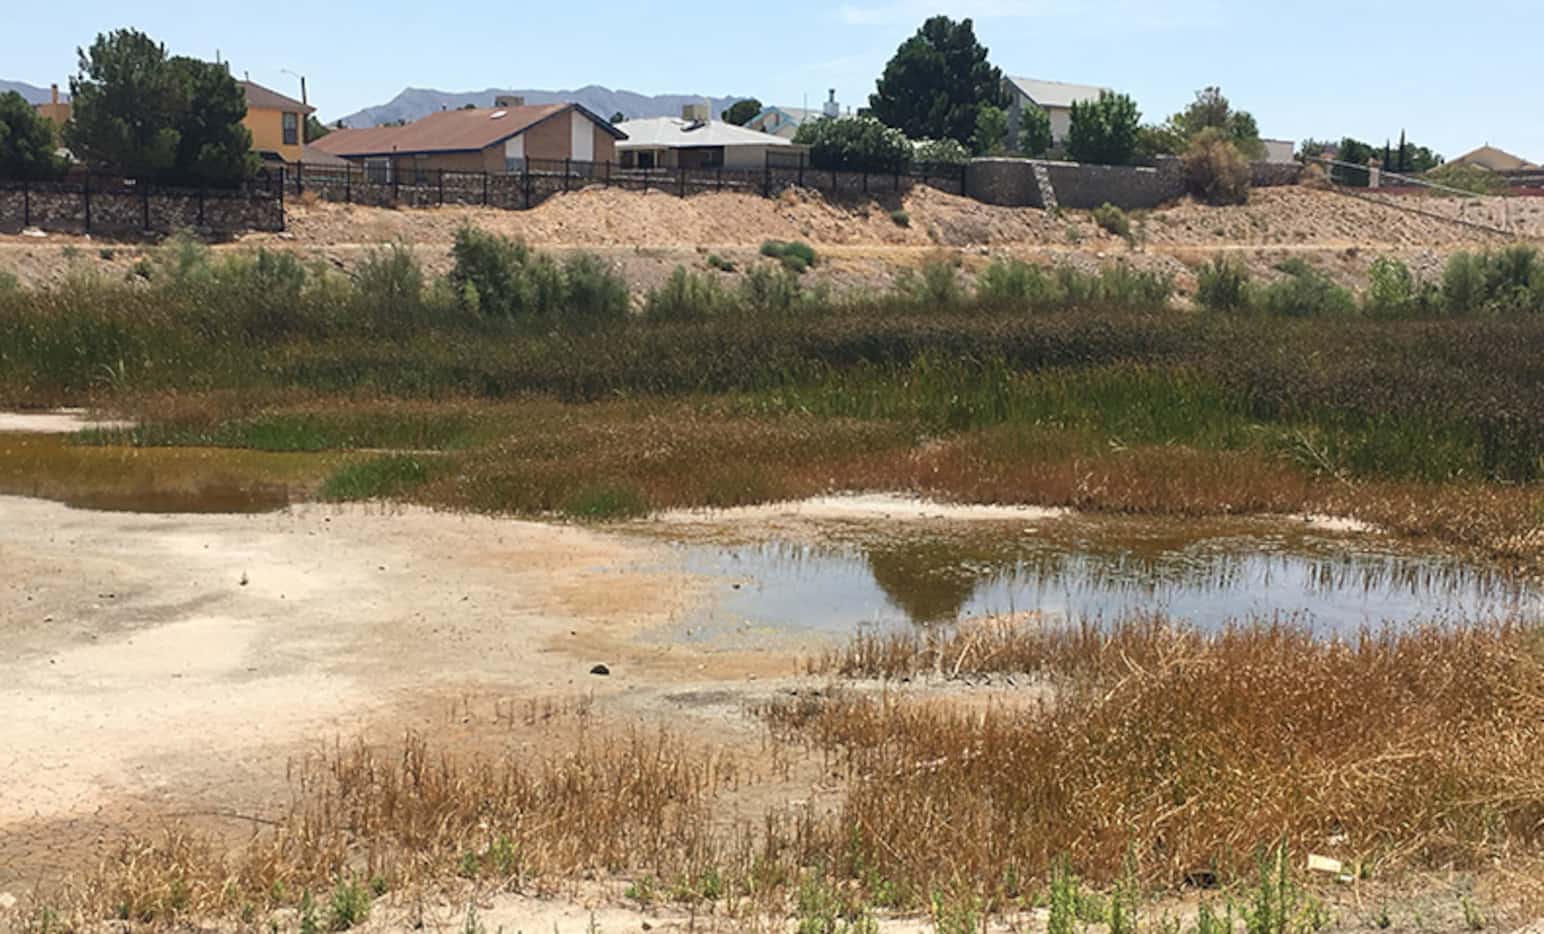 Standing water in a reservoir behind homes in El Paso is an area treated by vector control...